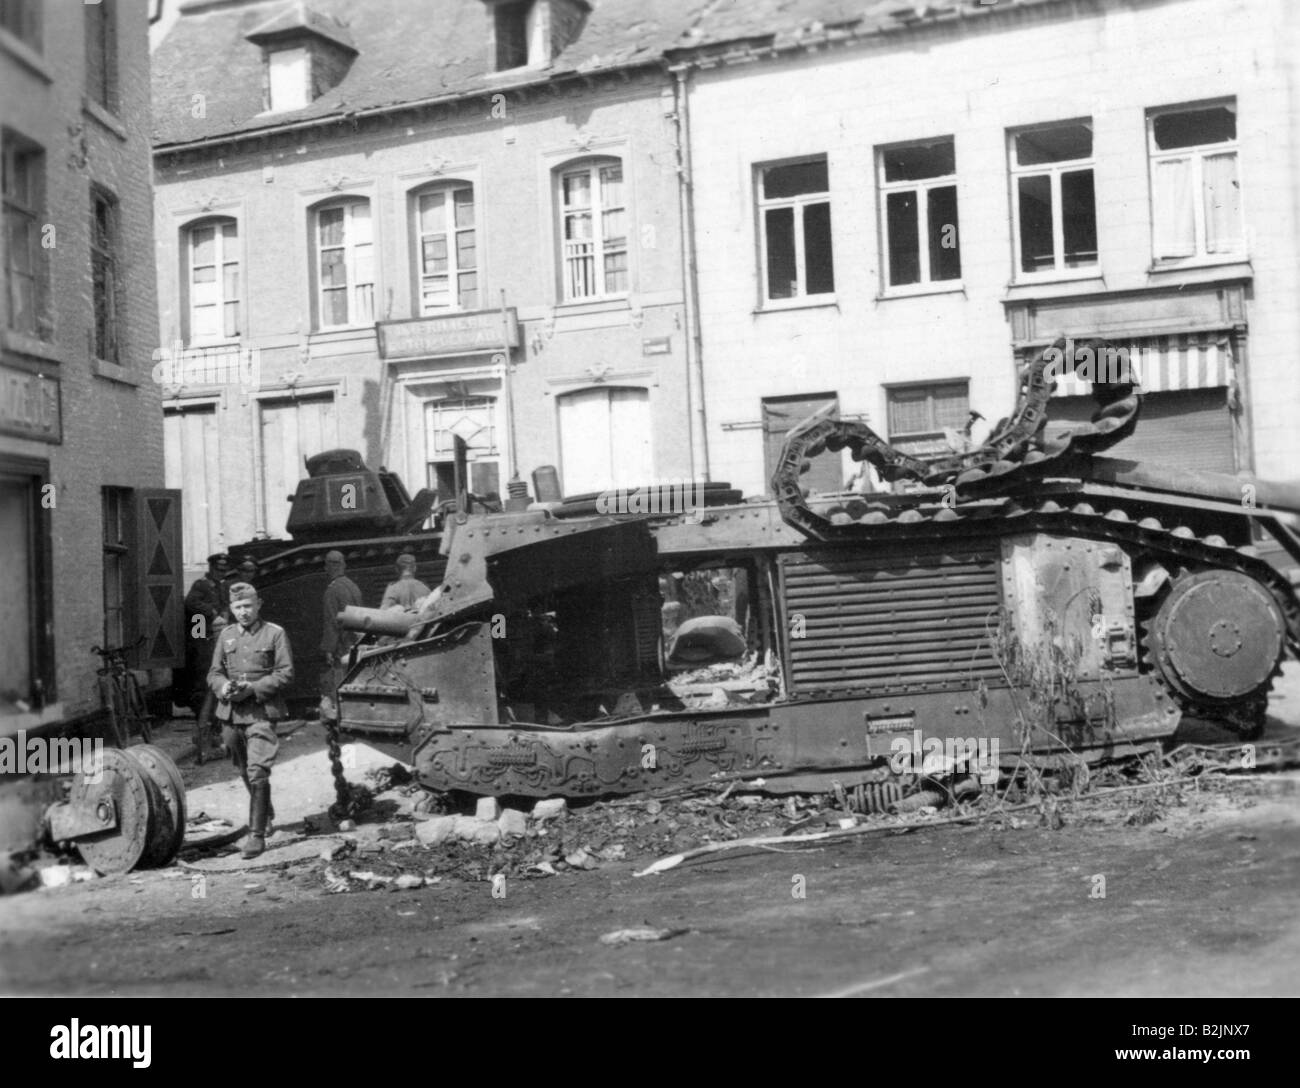 events, Second World War / WWII, Belgium, destroyed French tank Char B1, Beaumont, Summer 1940, German soldier, occupation, 20th century, historic, historical, B1, B-1, tanks, armoured fighting vehicle, vehicles, Battle of France, people, 1940s, Stock Photo